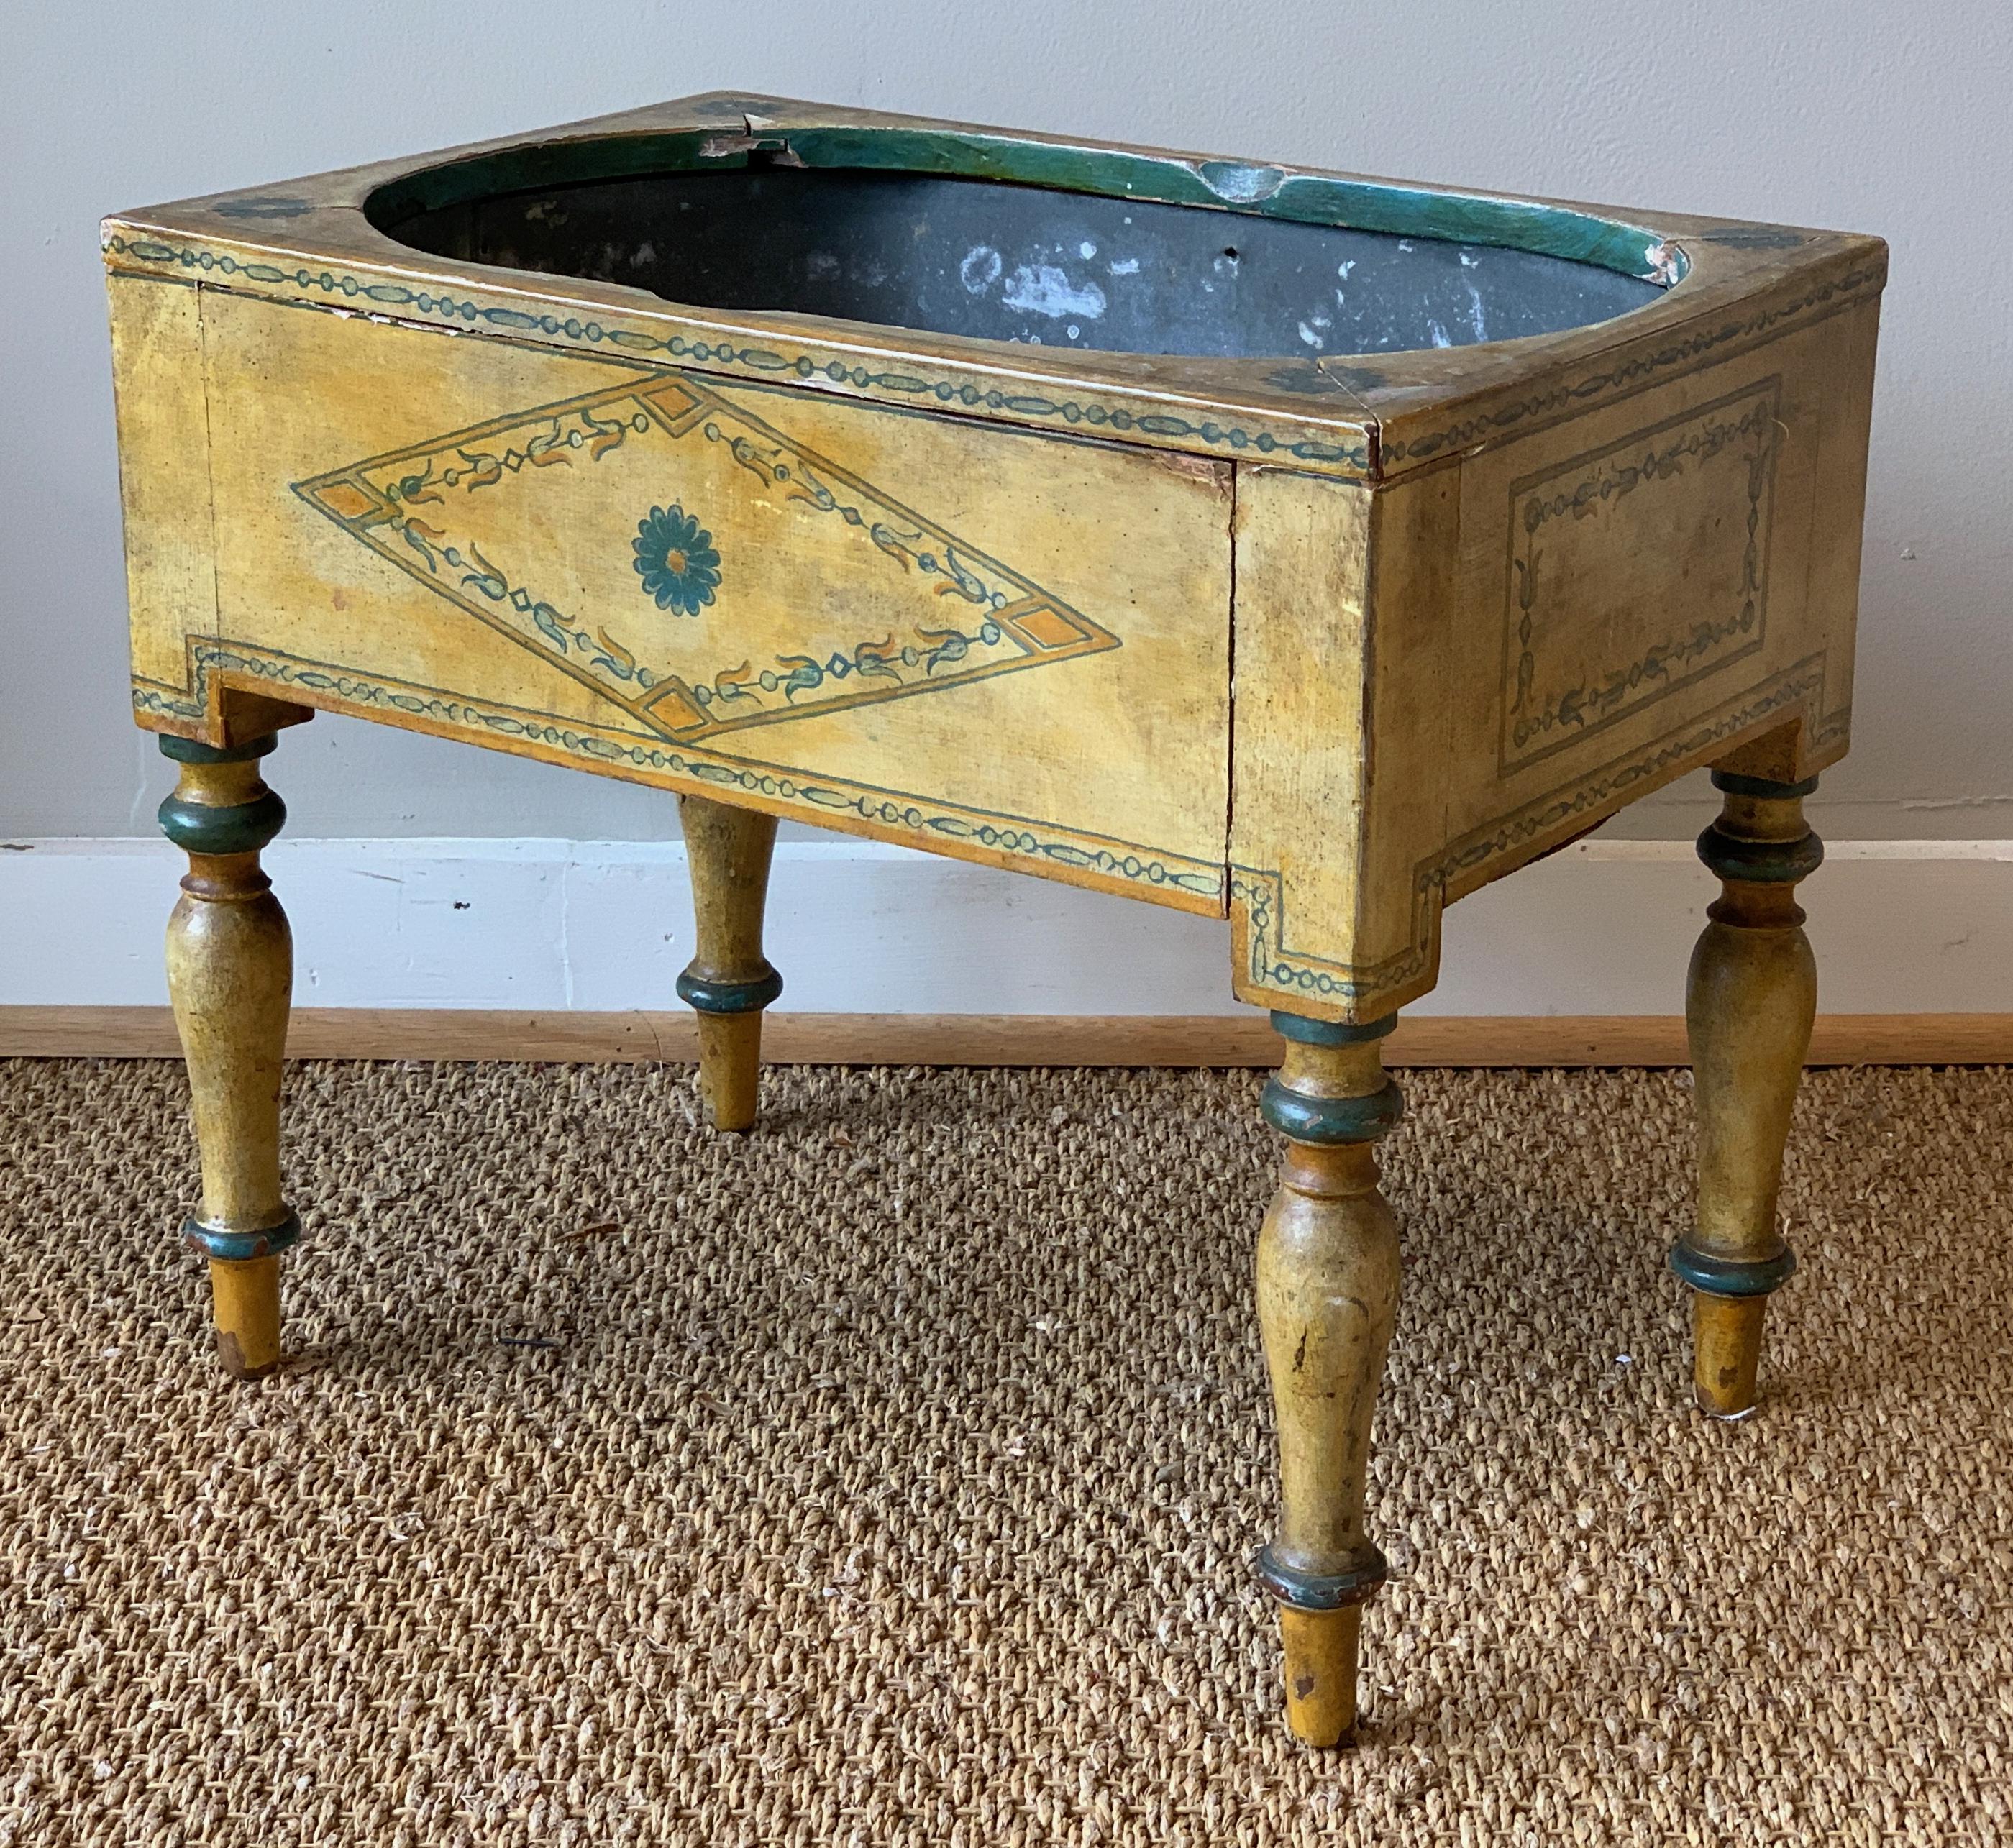 A small and charming early 19th century English paint decorated zinc lined planter. The entire surface in a muted mustard yellow with subtle green and gold accents.